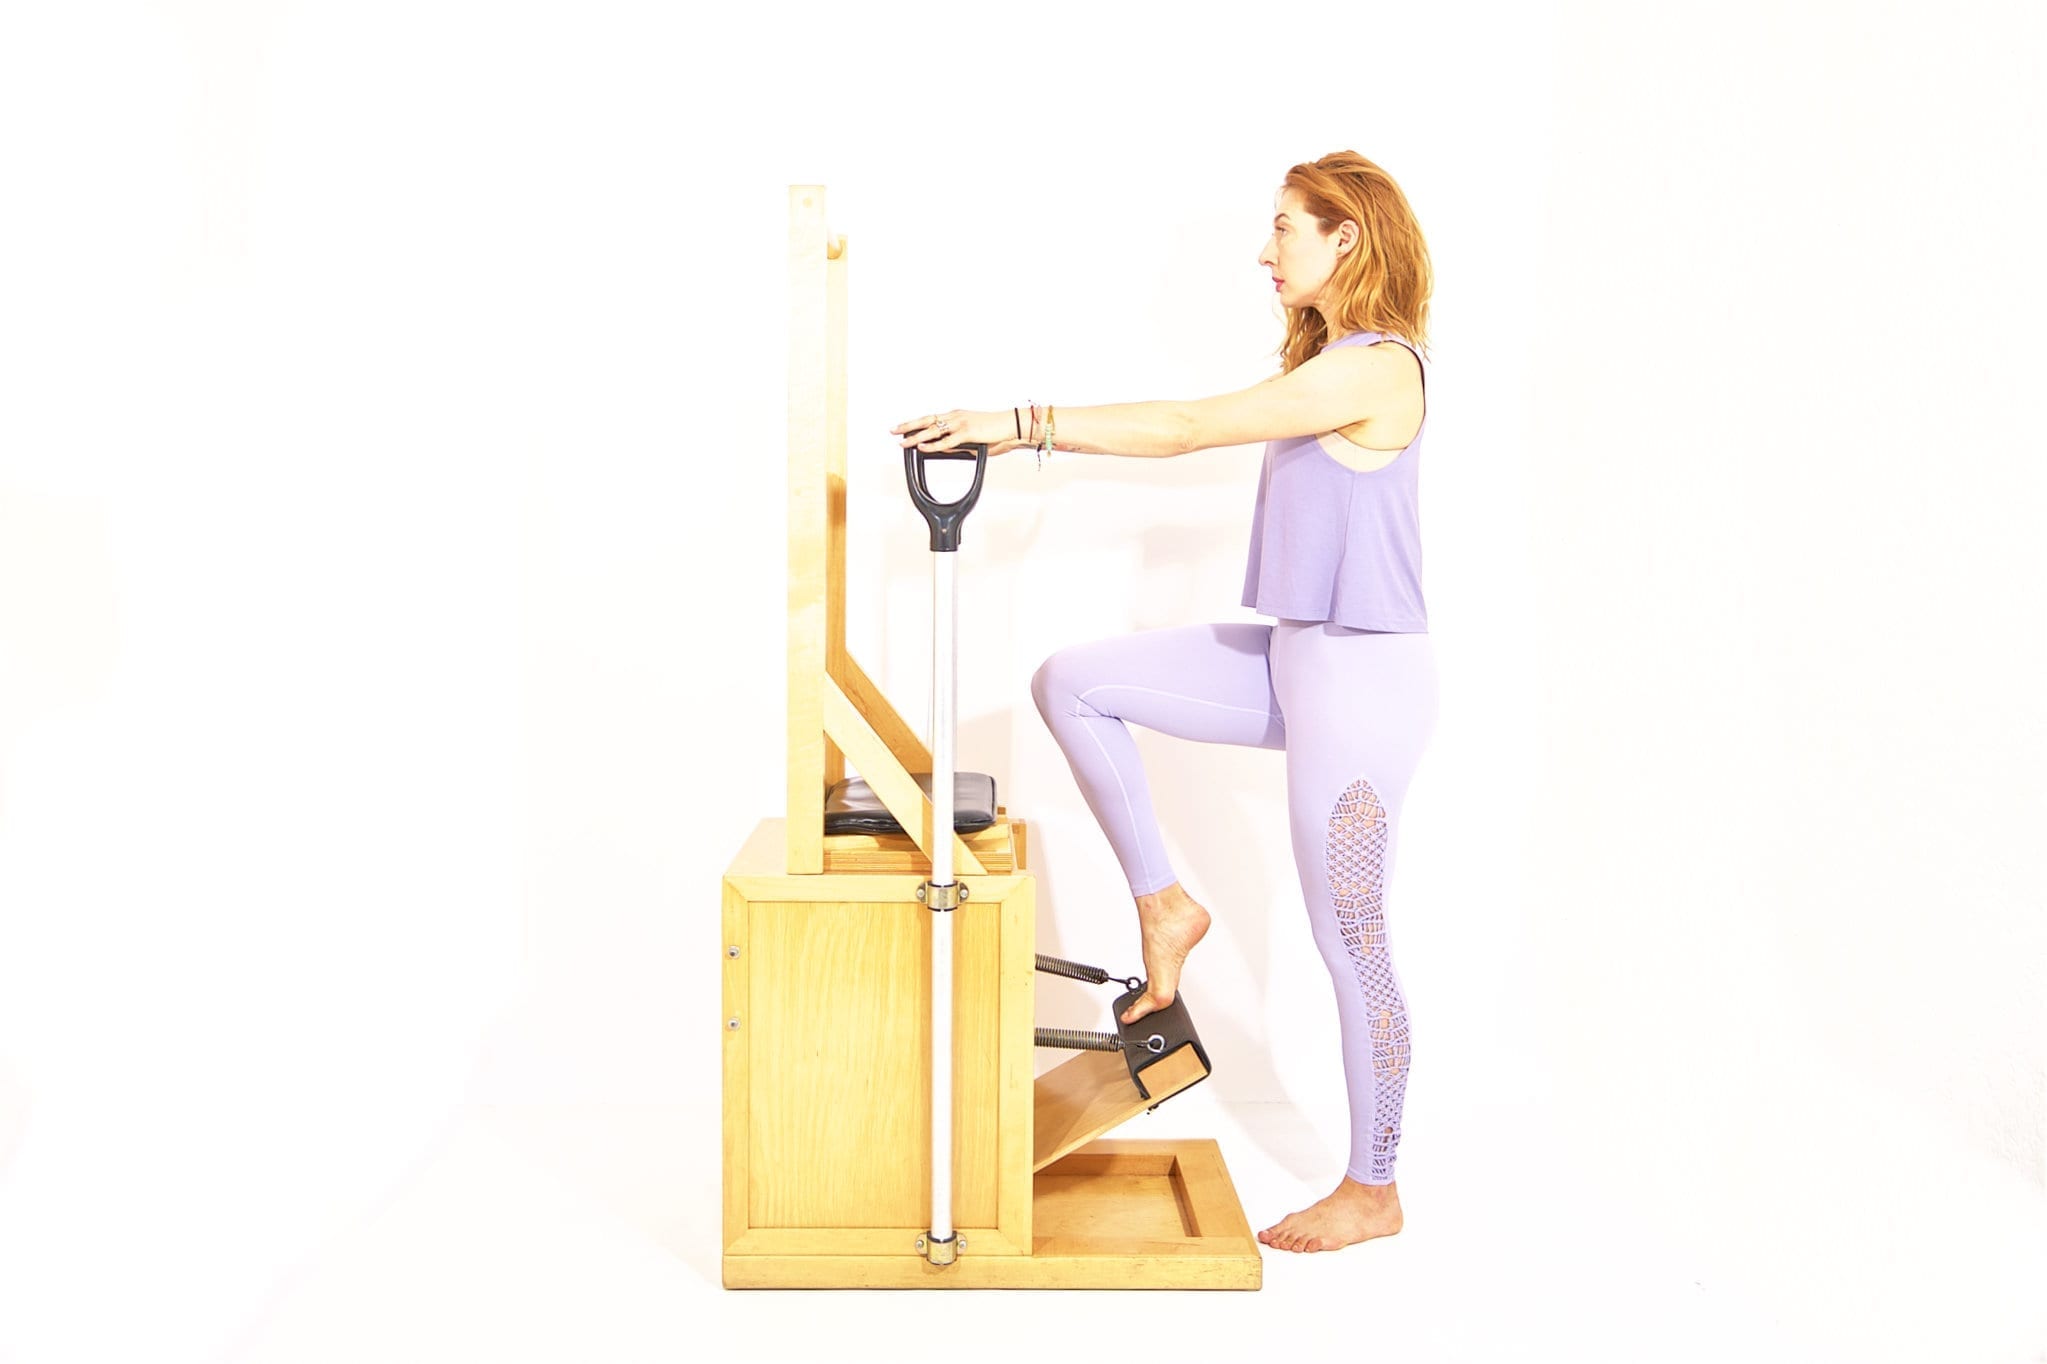 Press-Down-Front-on-the-High-Chair-Online-Pilates-Classes